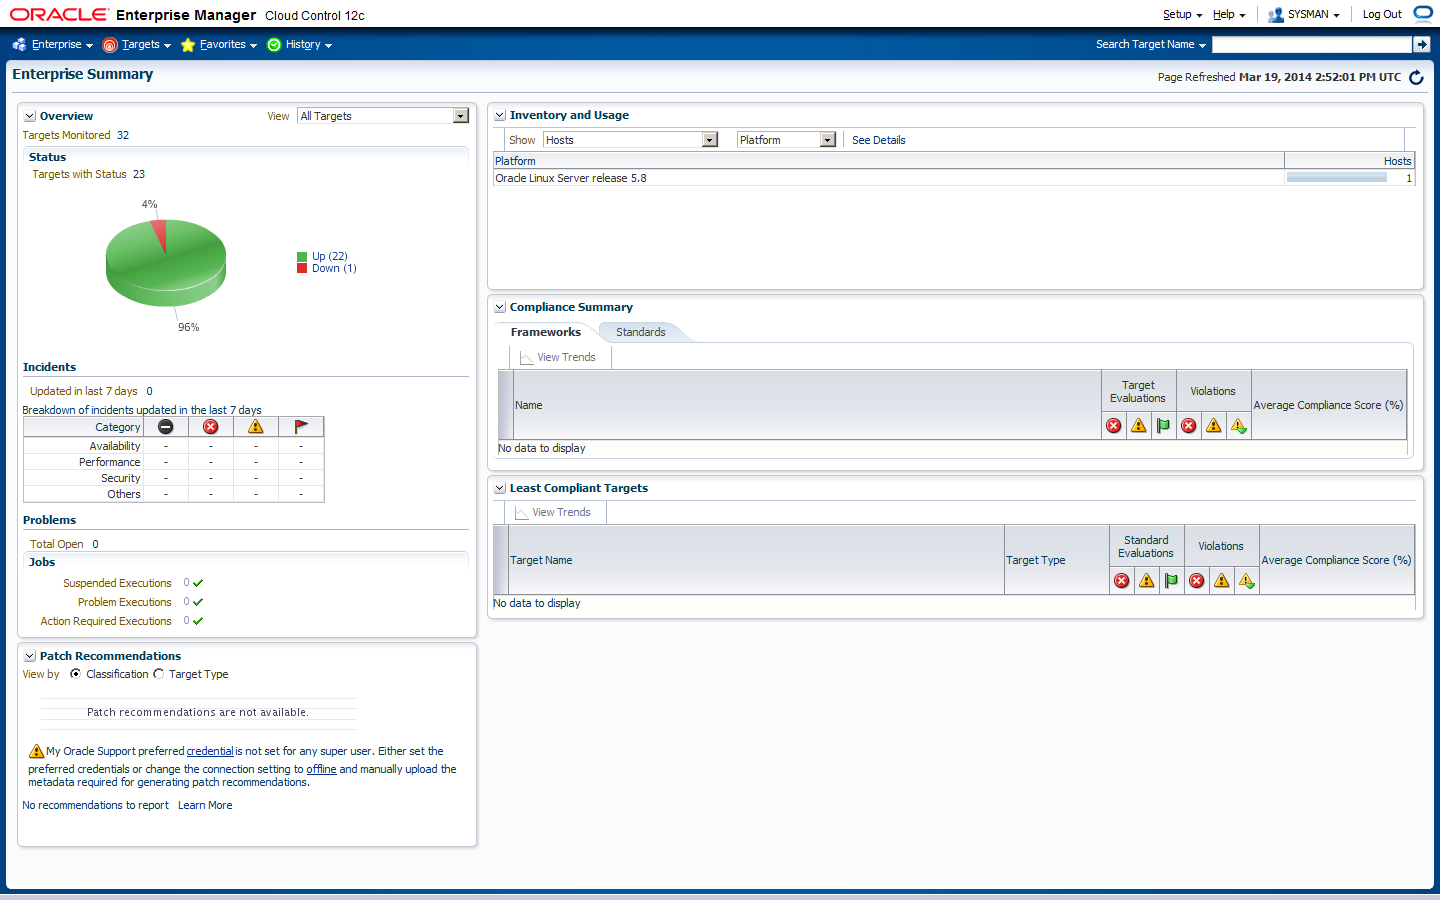 Oracle Enterprise Manager Homepage